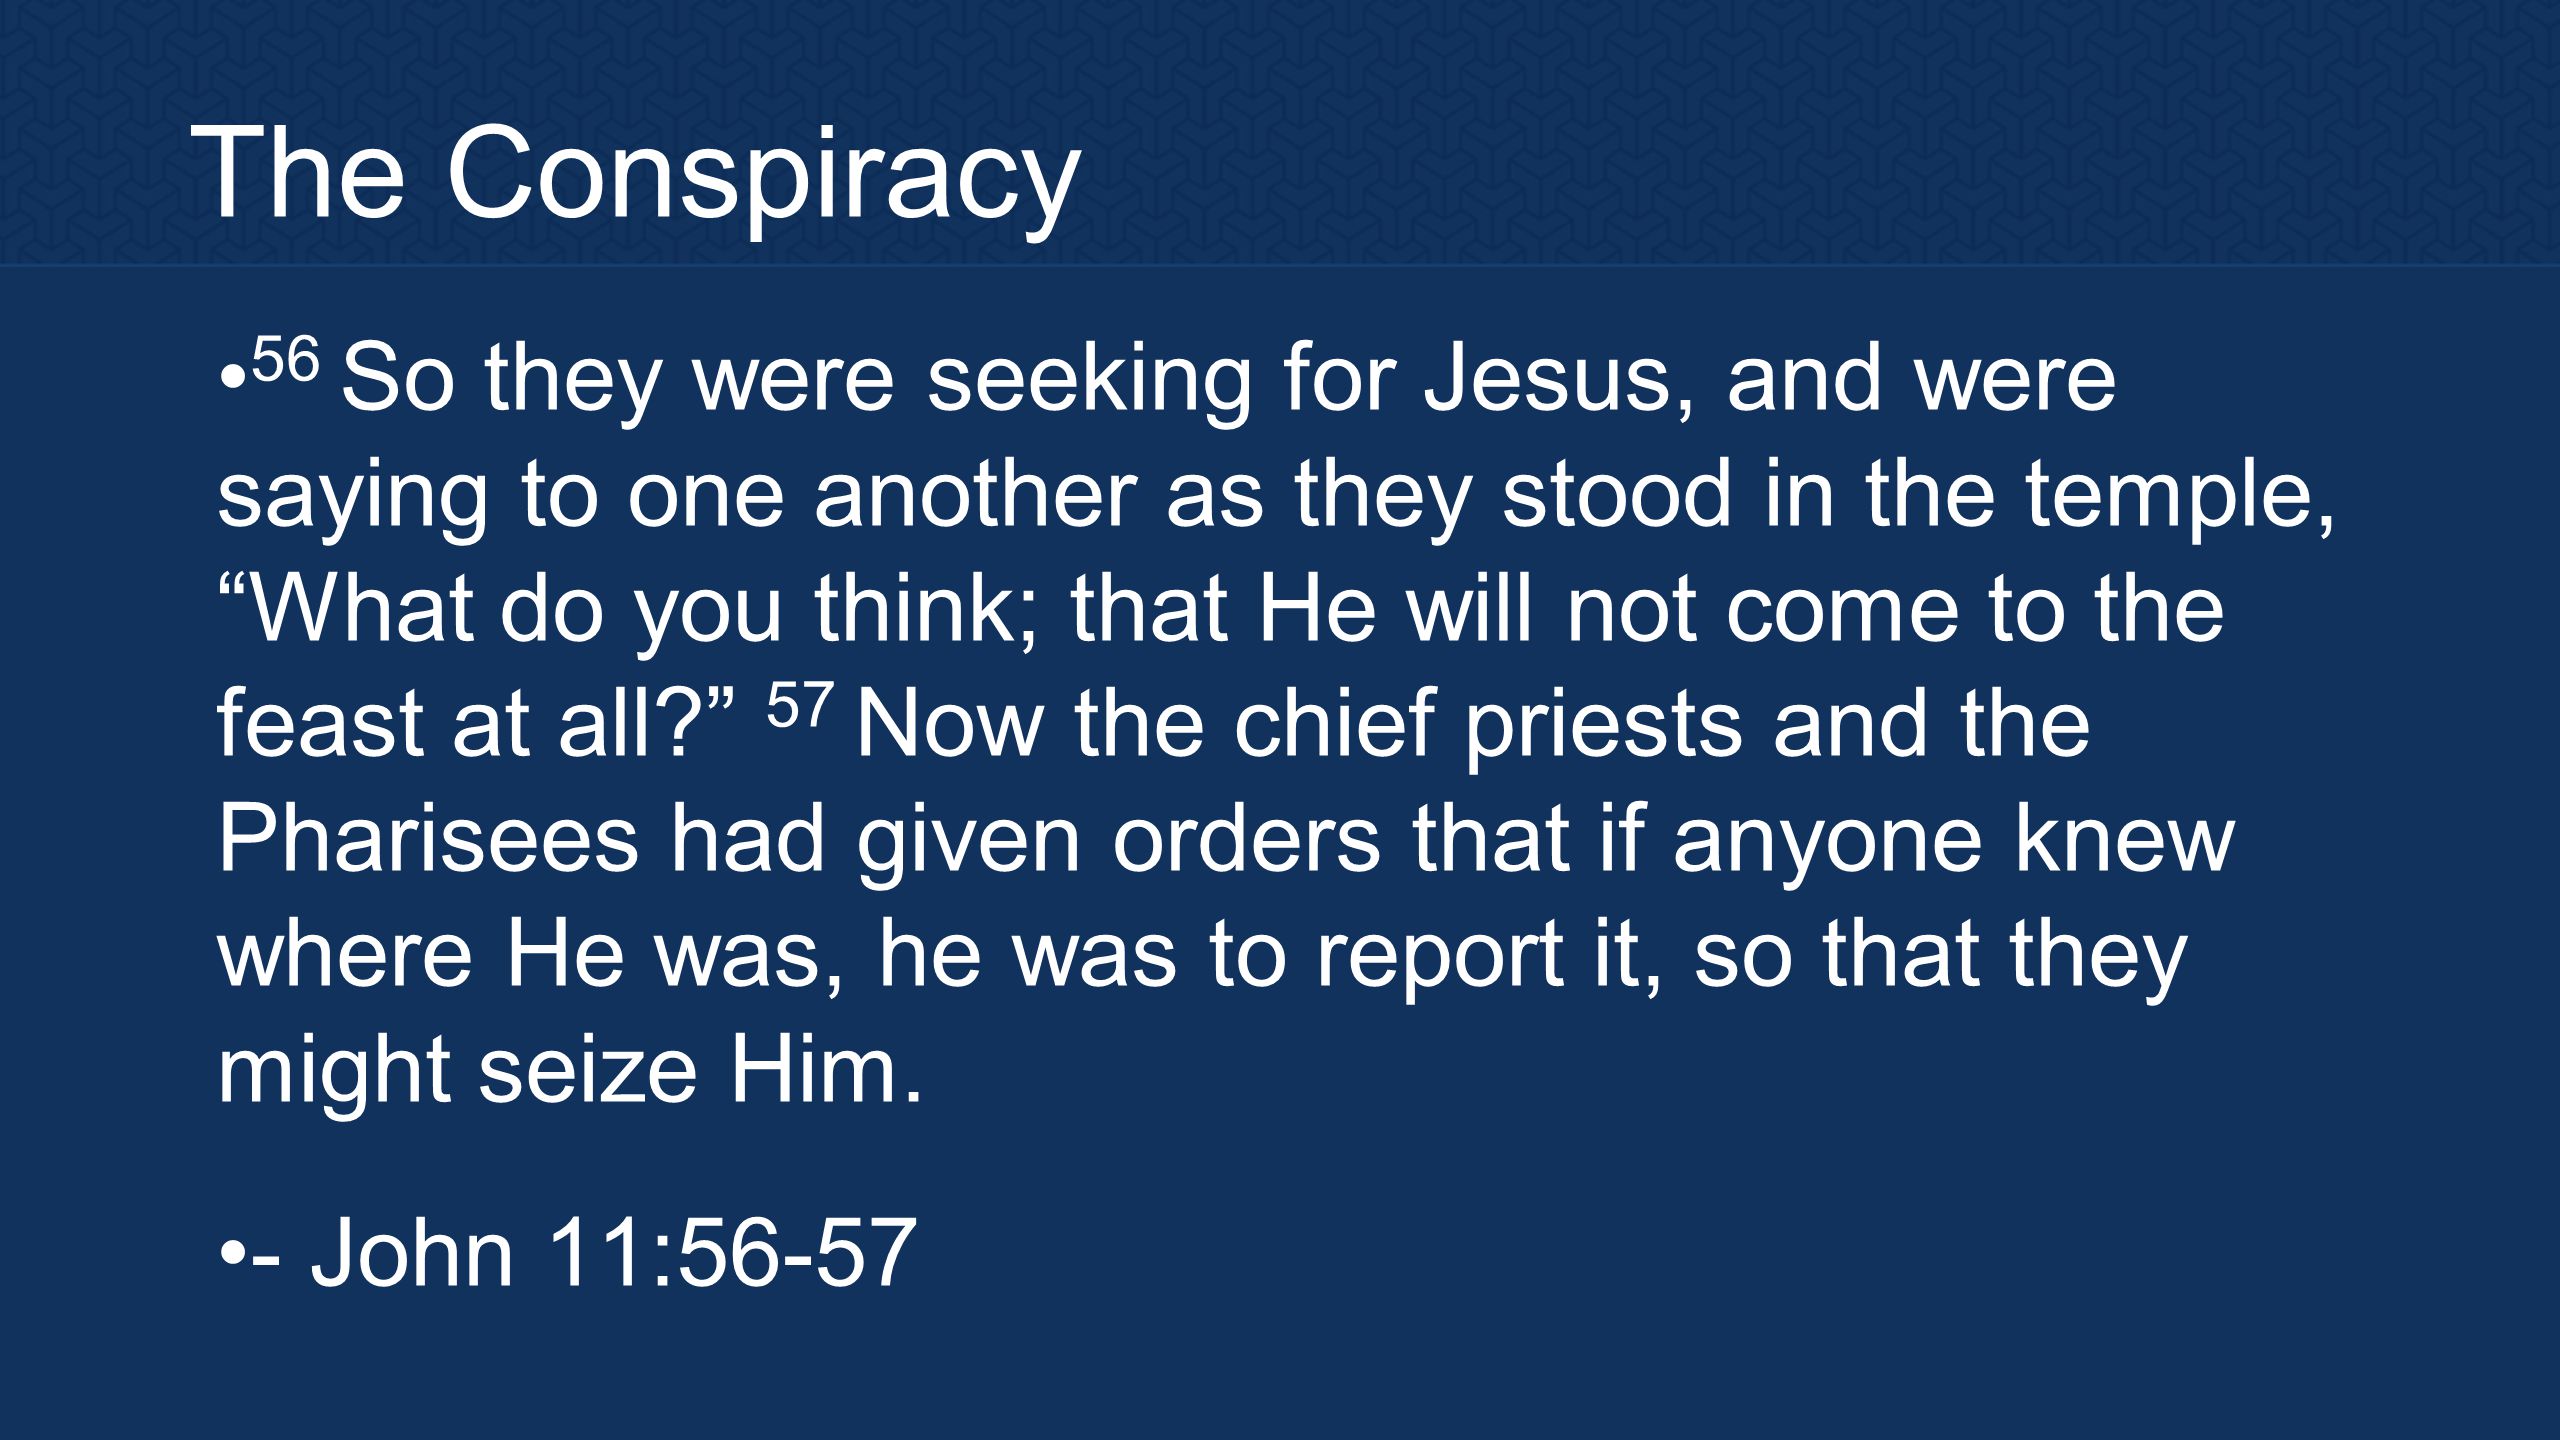 The Conspiracy 56 So they were seeking for Jesus, and were saying to one another as they stood in the temple, What do you think; that He will not come to the feast at all 57 Now the chief priests and the Pharisees had given orders that if anyone knew where He was, he was to report it, so that they might seize Him.